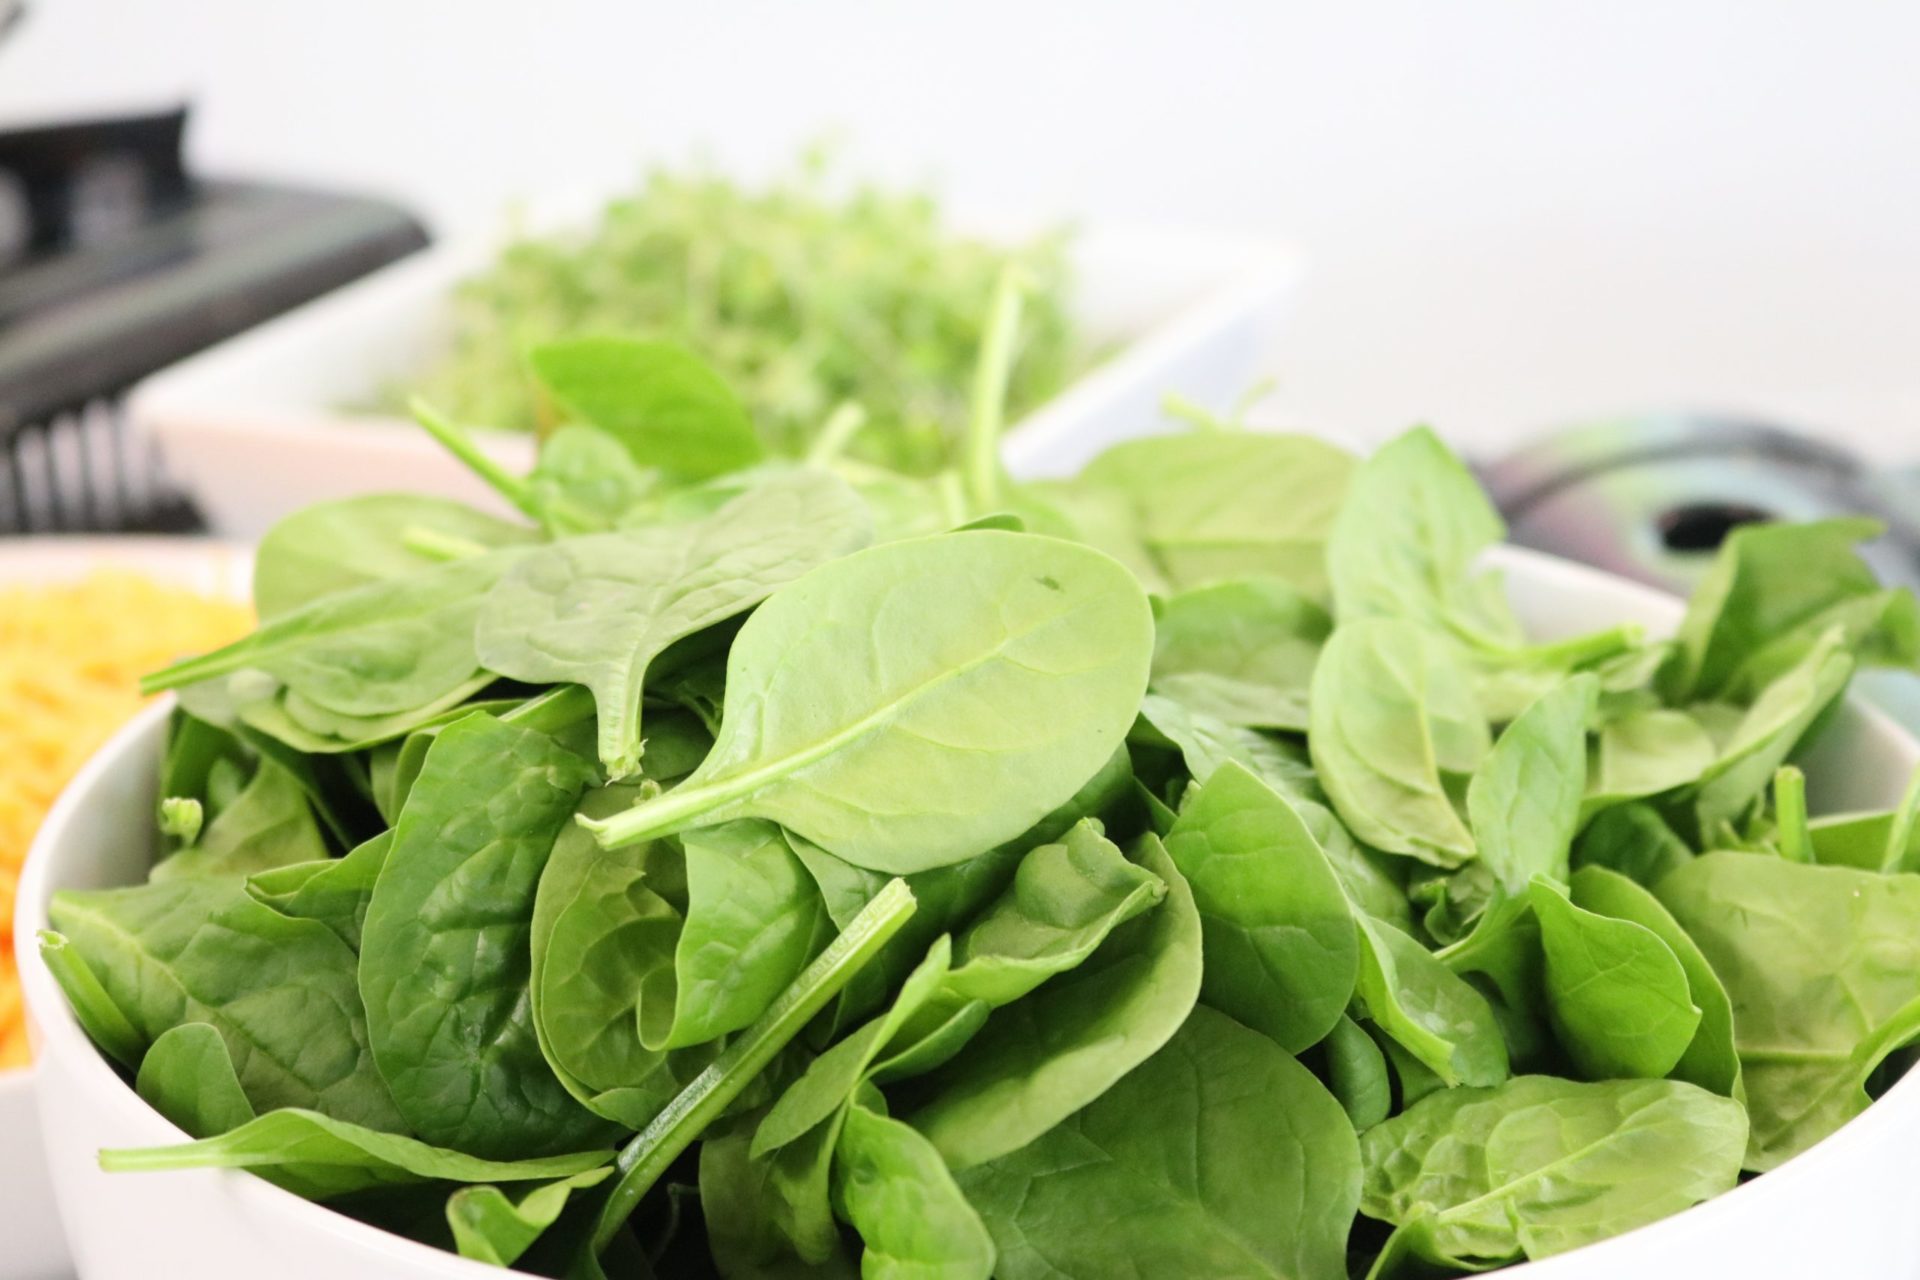 How to Grow Hydroponic Spinach - AGrowTronics - IIoT For Growing